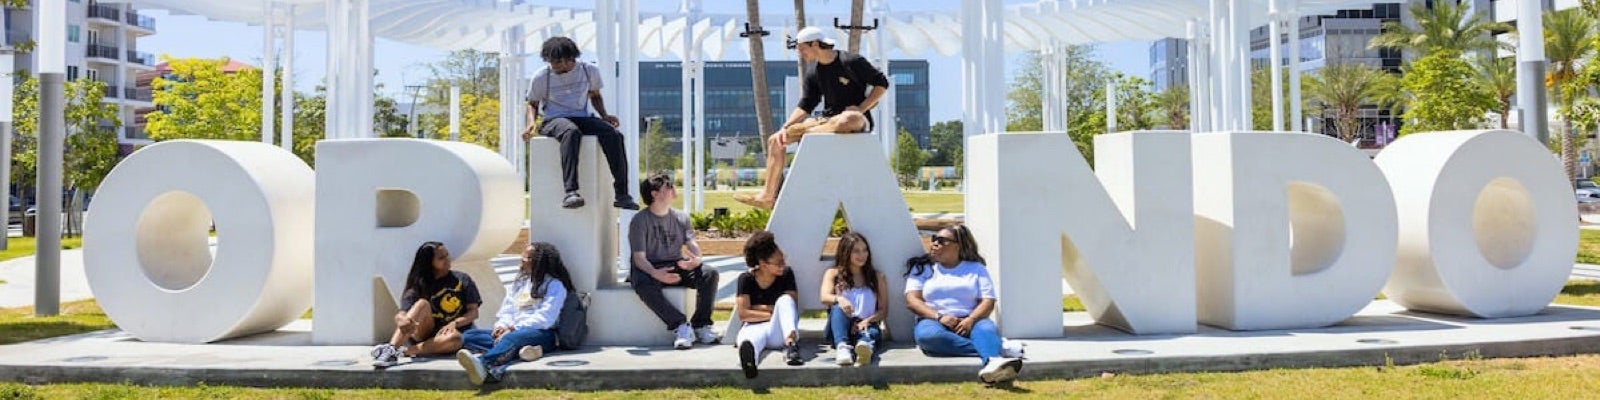 ucf out of state students hanging out on an Orlando sign